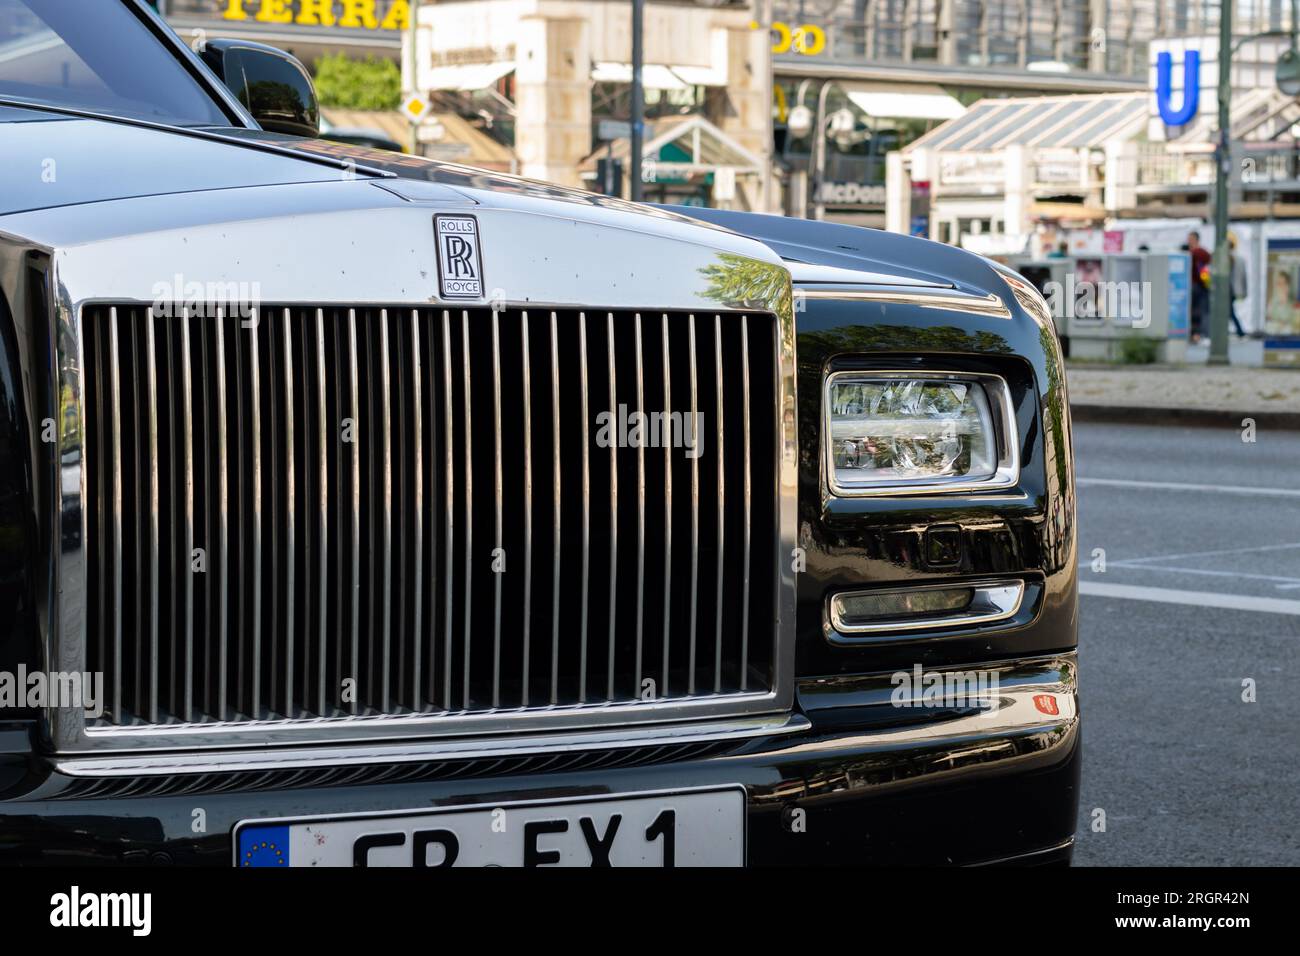 Front of a Rolls Royce Phantom car with the public transportation sign of the underground in the background. Luxury limousine in a close-up view. Stock Photo